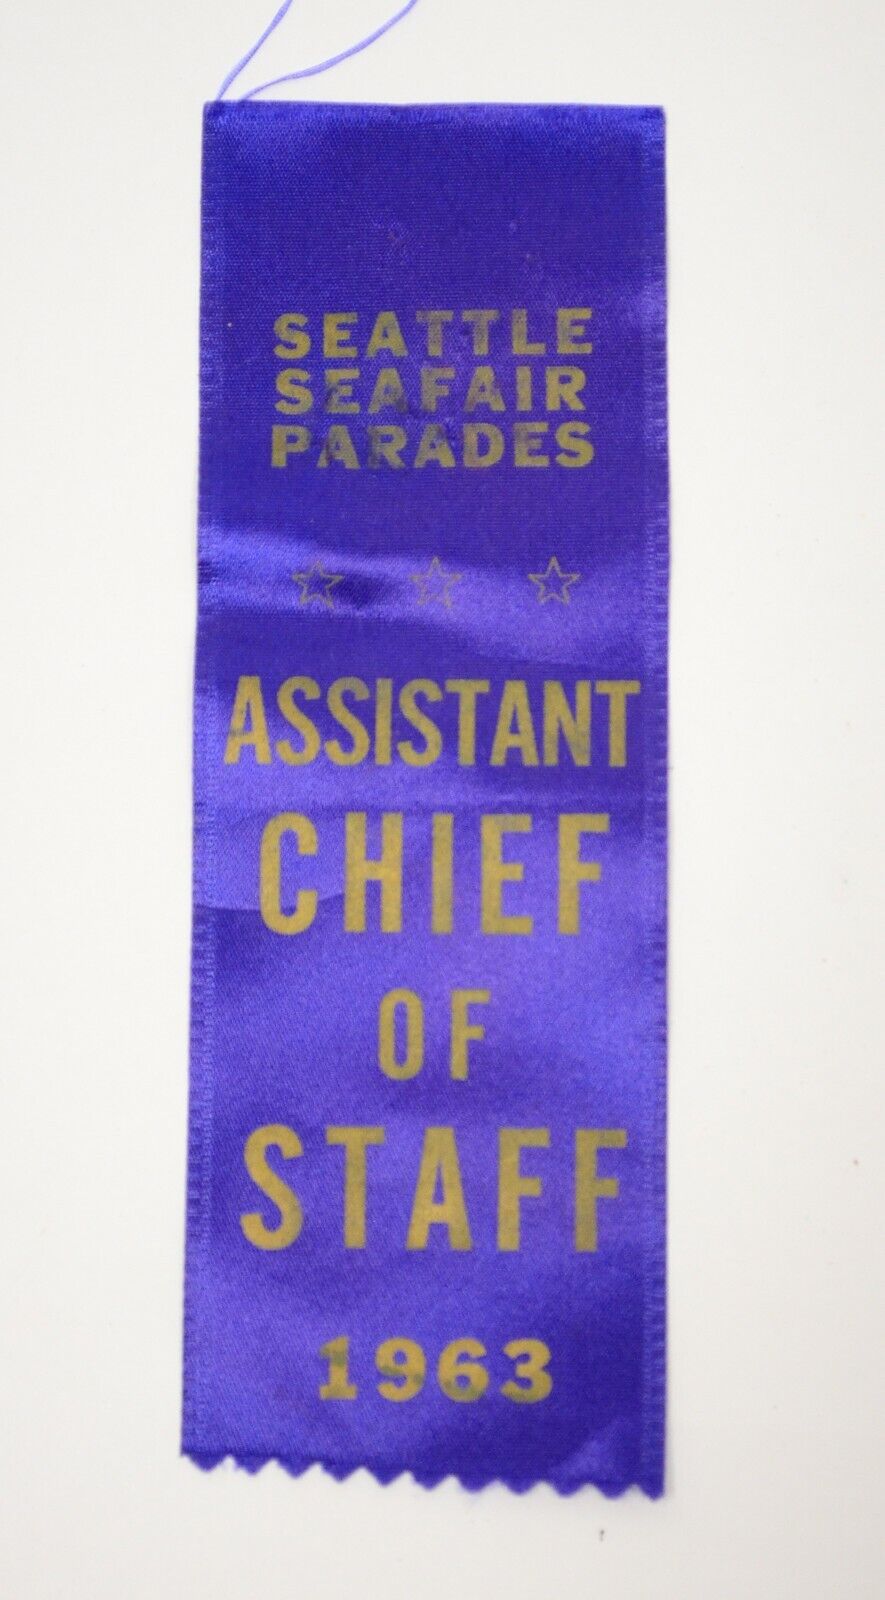 1963 Seattle Seafair Parade Parades Official Assistant Chief of Staff Ribbon Vtg